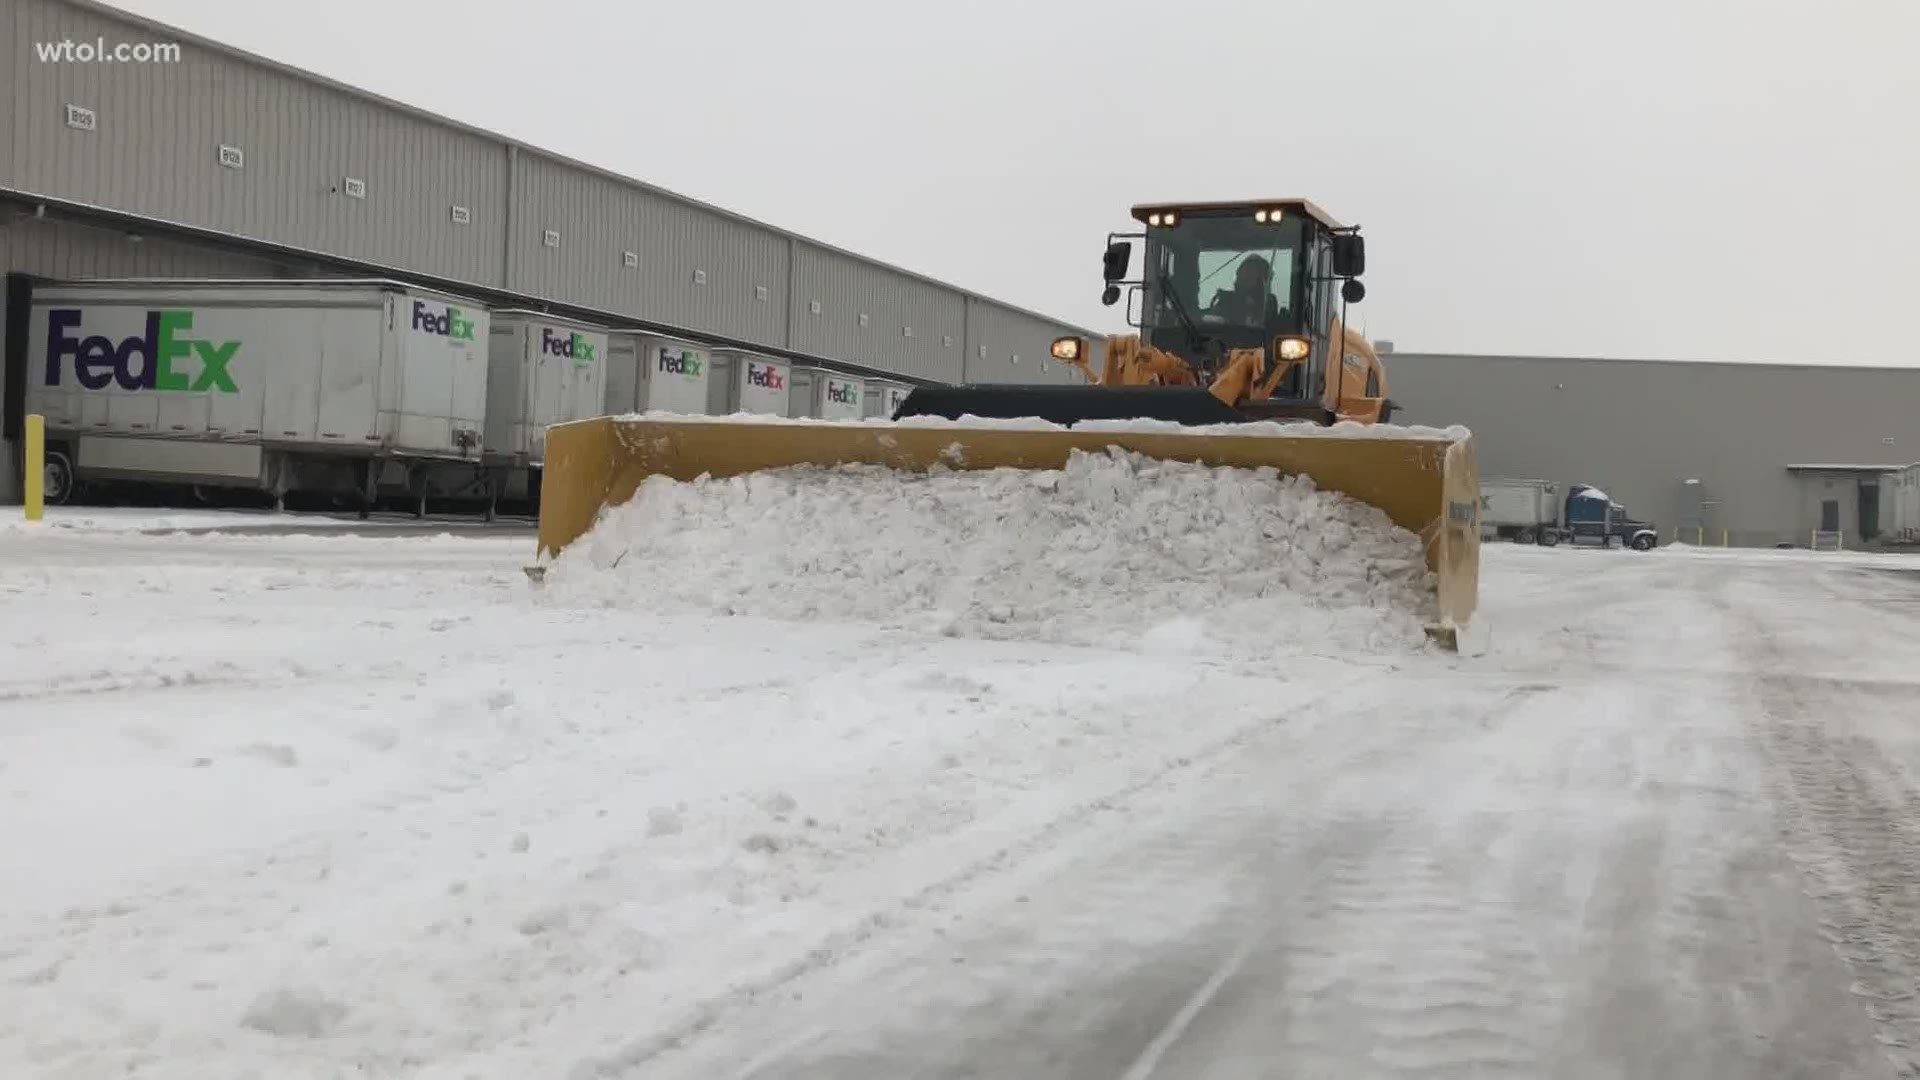 Expresso Car Wash in Maumee and Holcomb Enterprises plow company in Port Clinton have seen their businesses benefit from all of the snow.